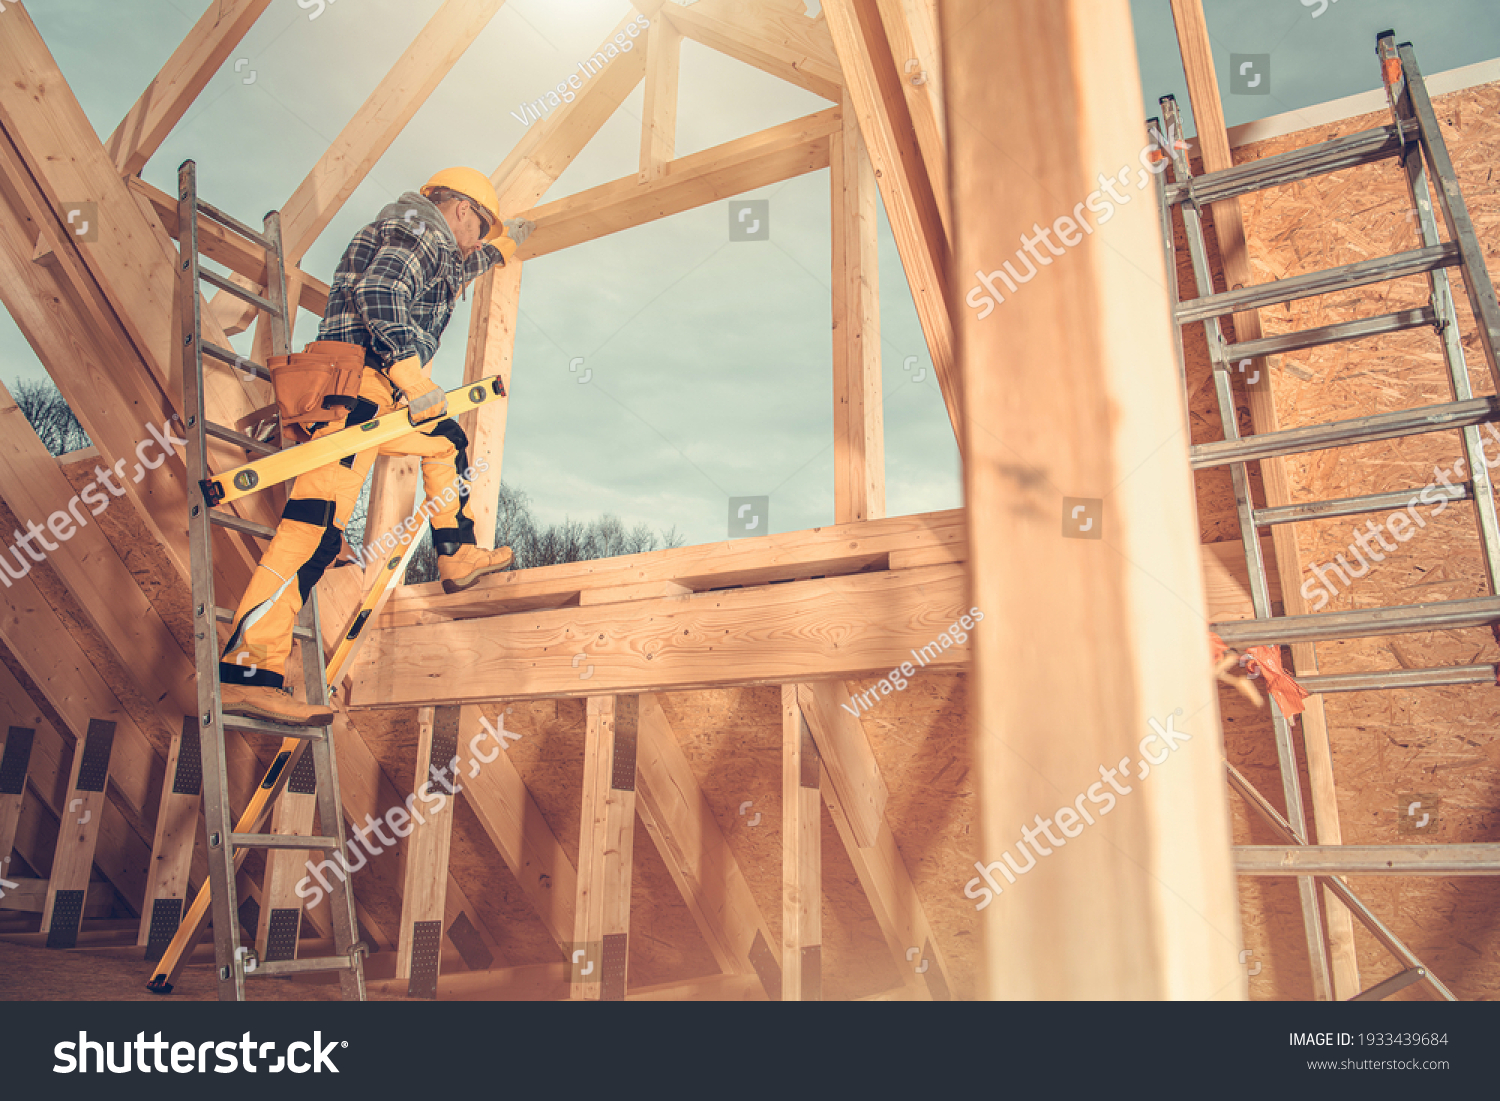 232,232 Construction worker building house Images, Stock Photos ...